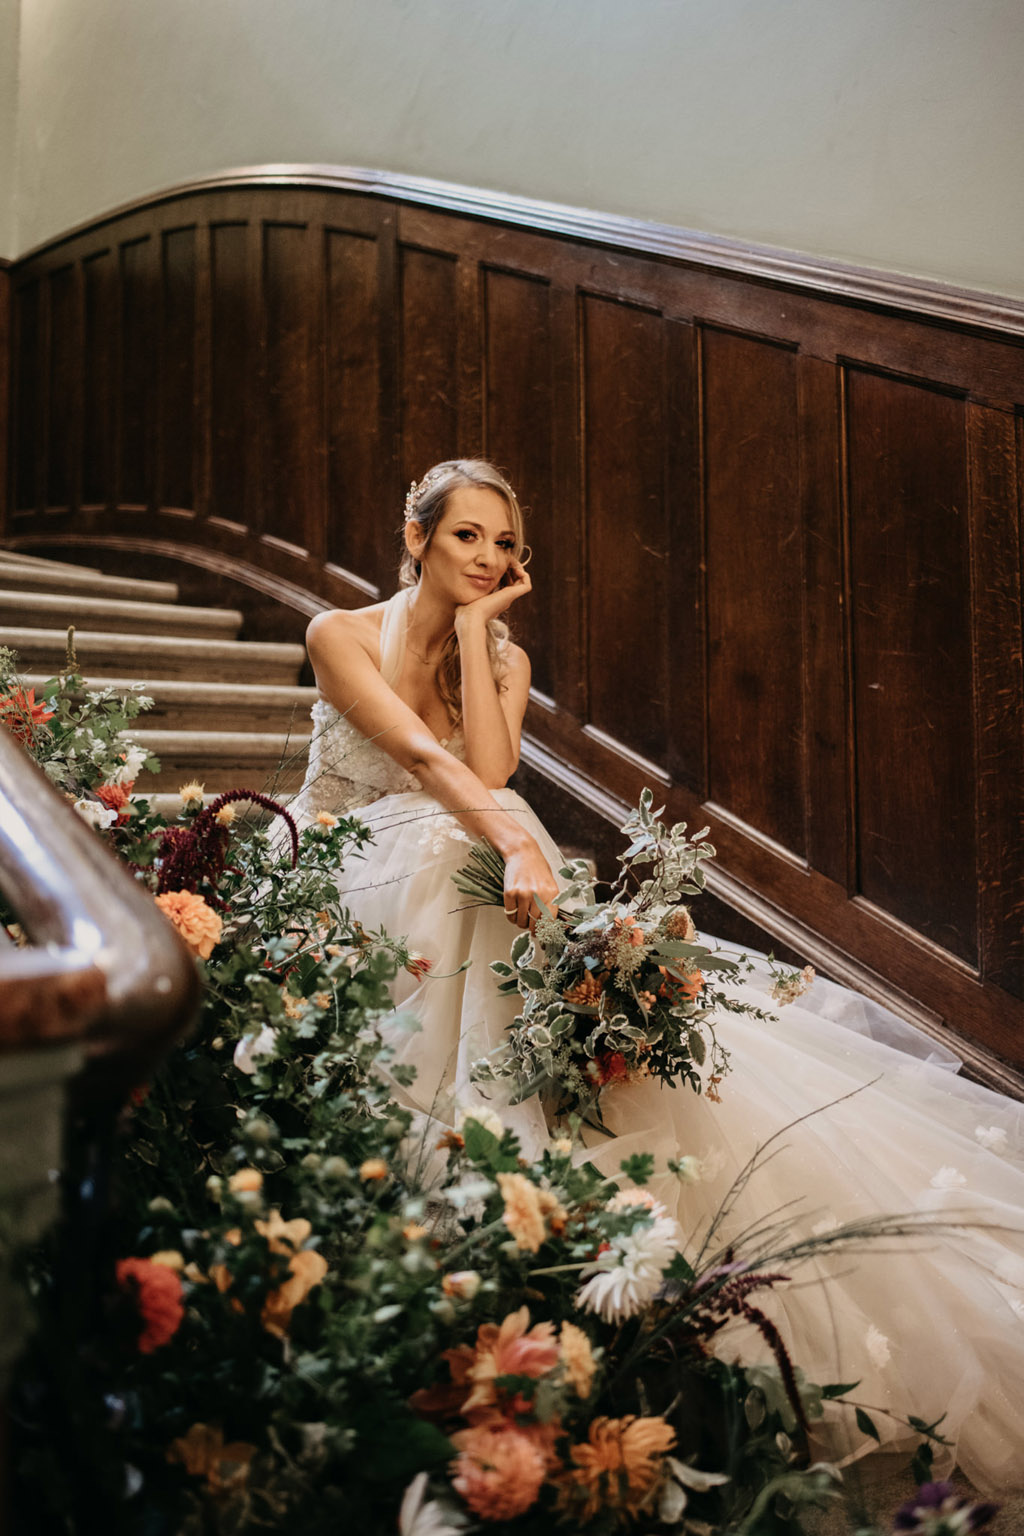  Traditional wedding inspiration with a modern twist, image credit Lottie Photography (11)